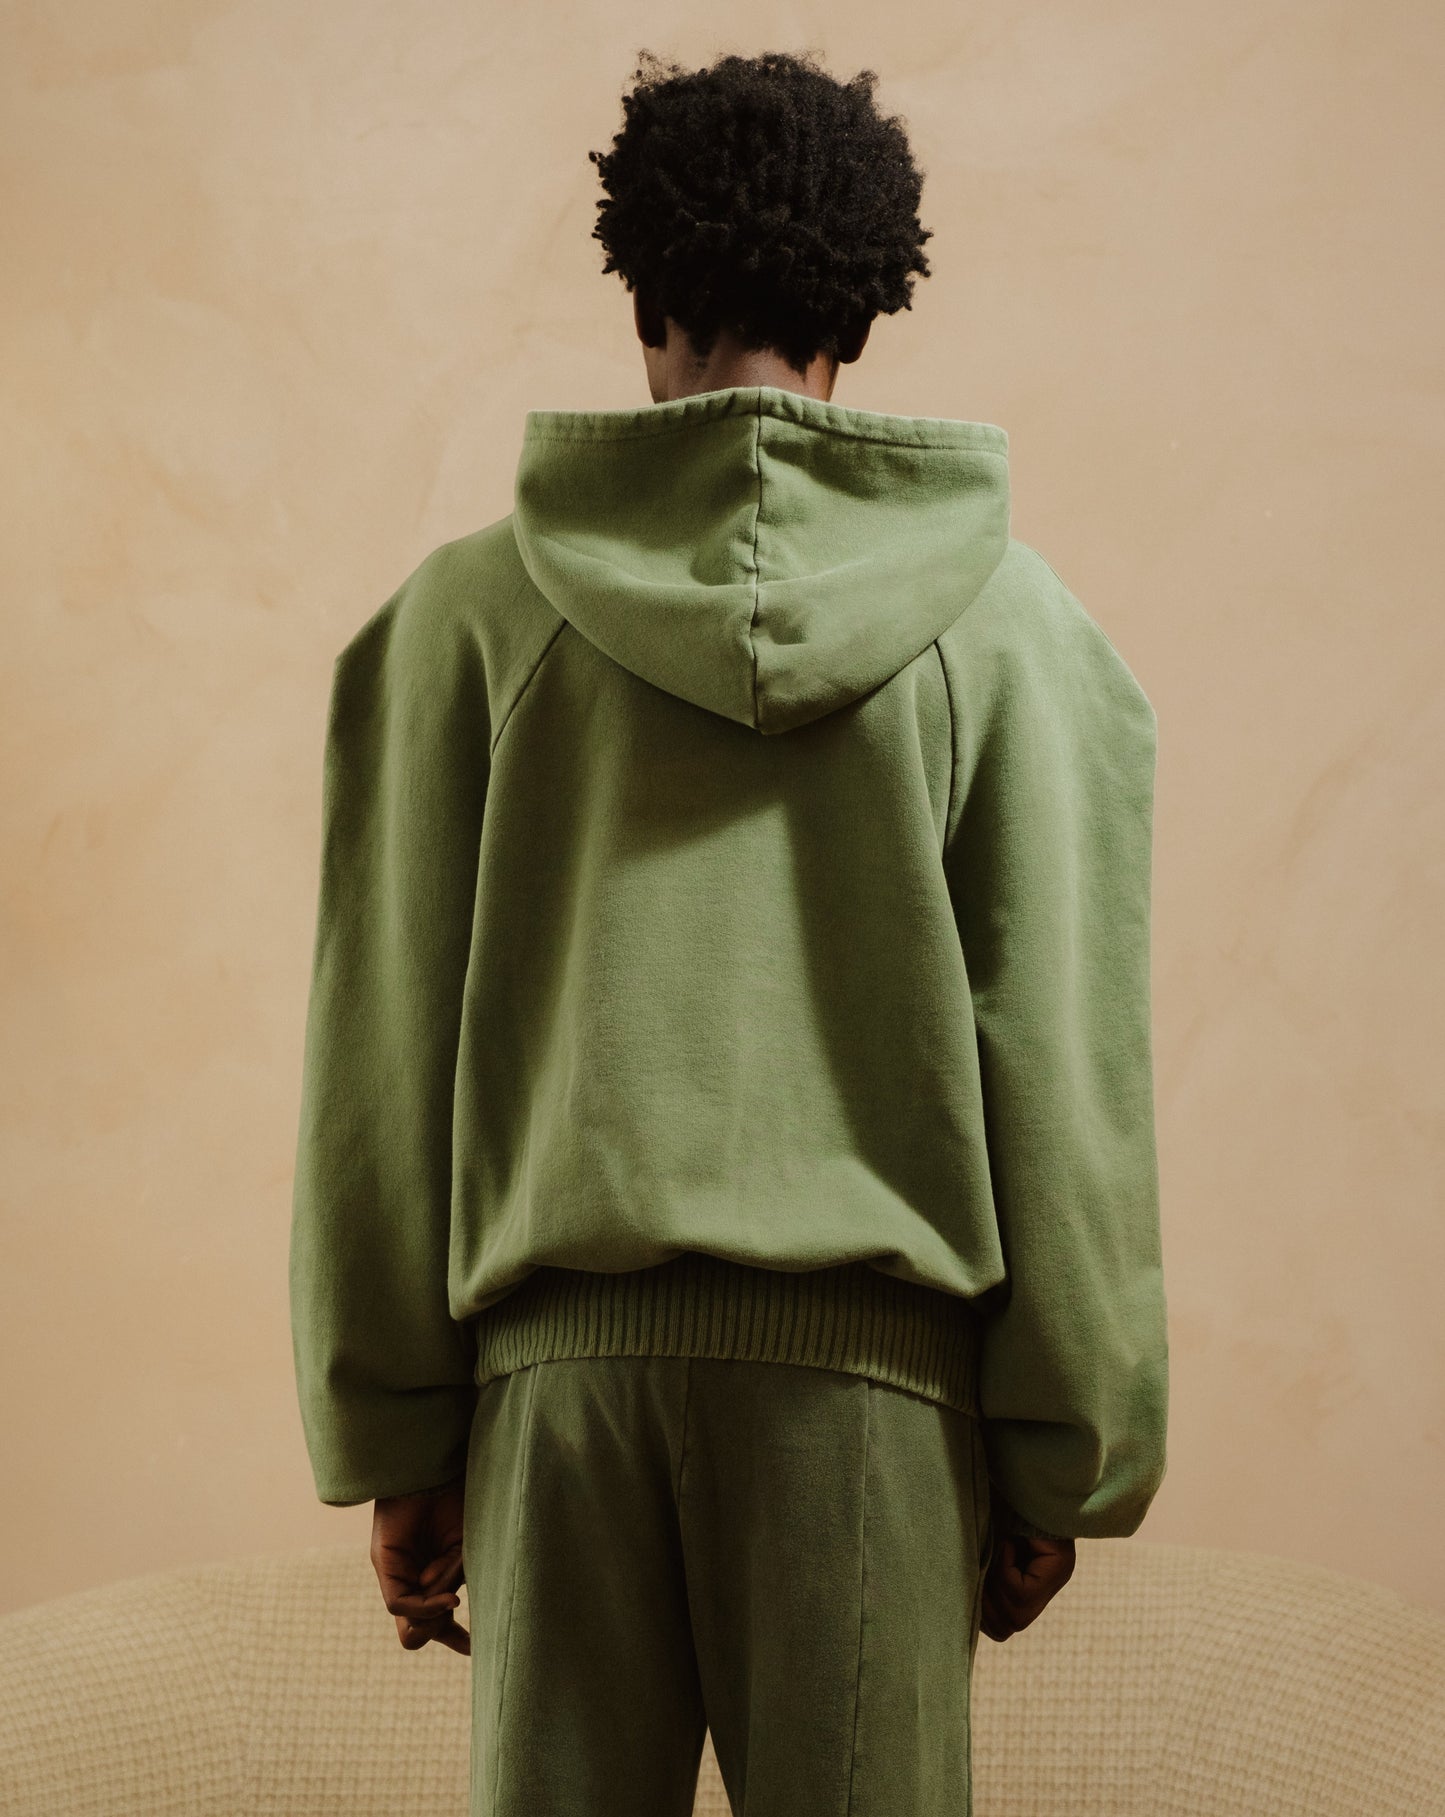 ALL-SEEING GARDEN EMBROIDERED HOODIE IN EMERALD